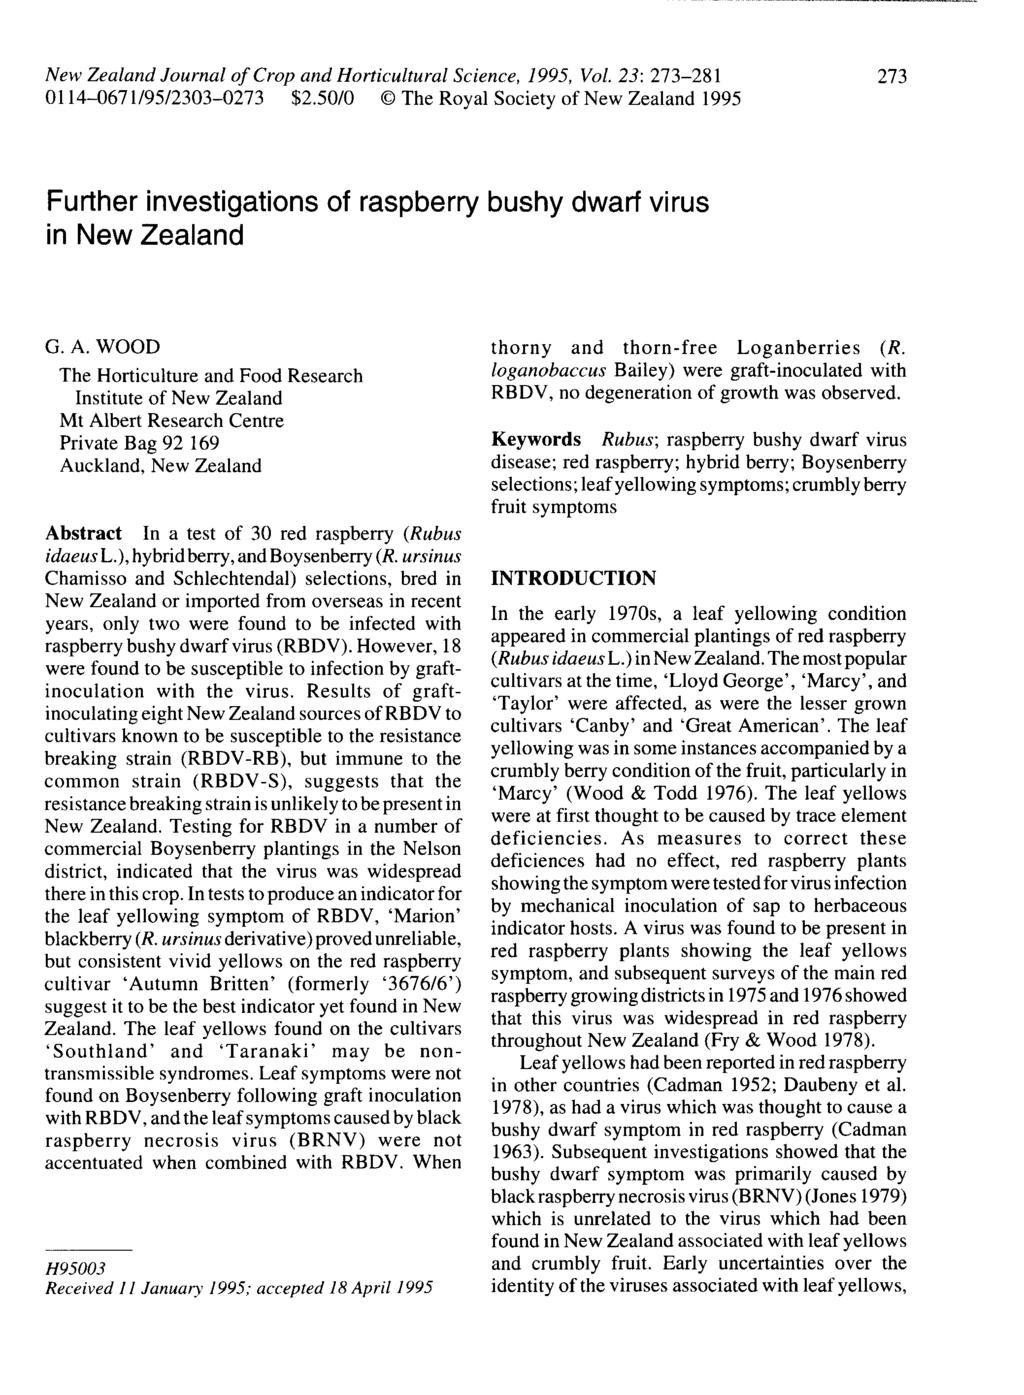 New Zealand Journal of Crop and Horticultural Science, 1995, Vol. 23: 273-281 114-71/95/233-273 $2.